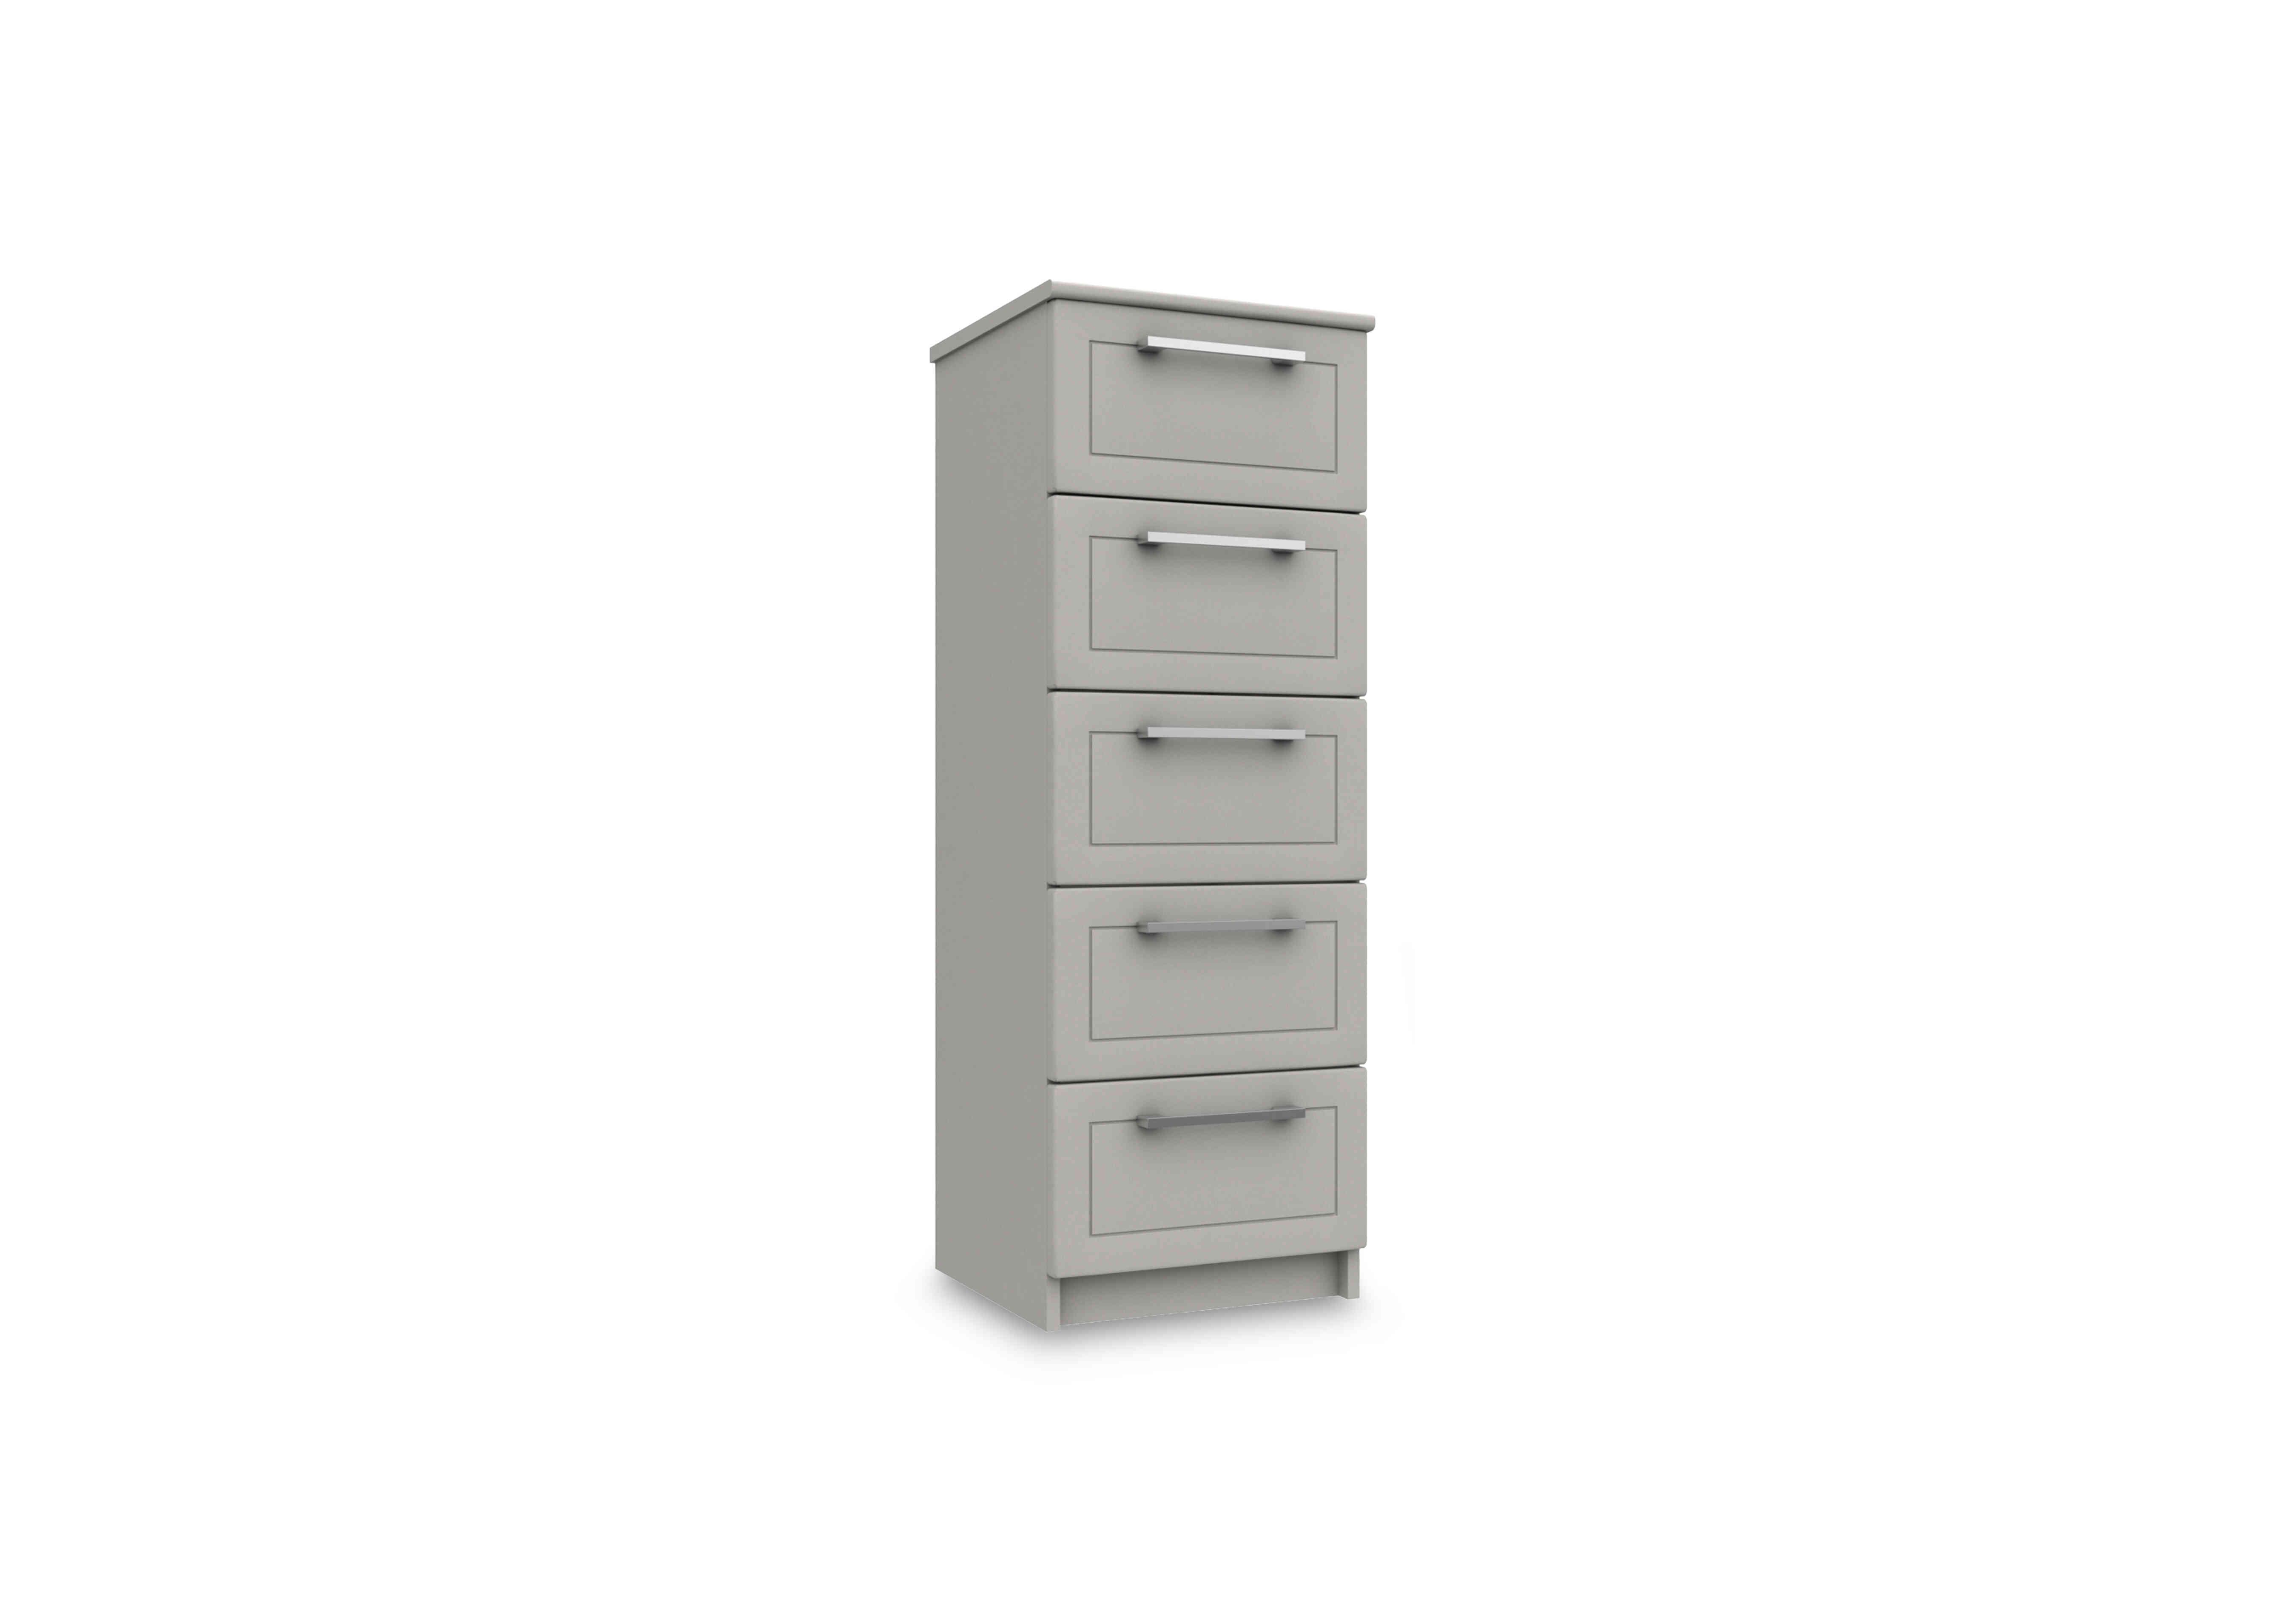 Bexley 5 Drawer Tall Boy in Light Grey Gloss on Furniture Village